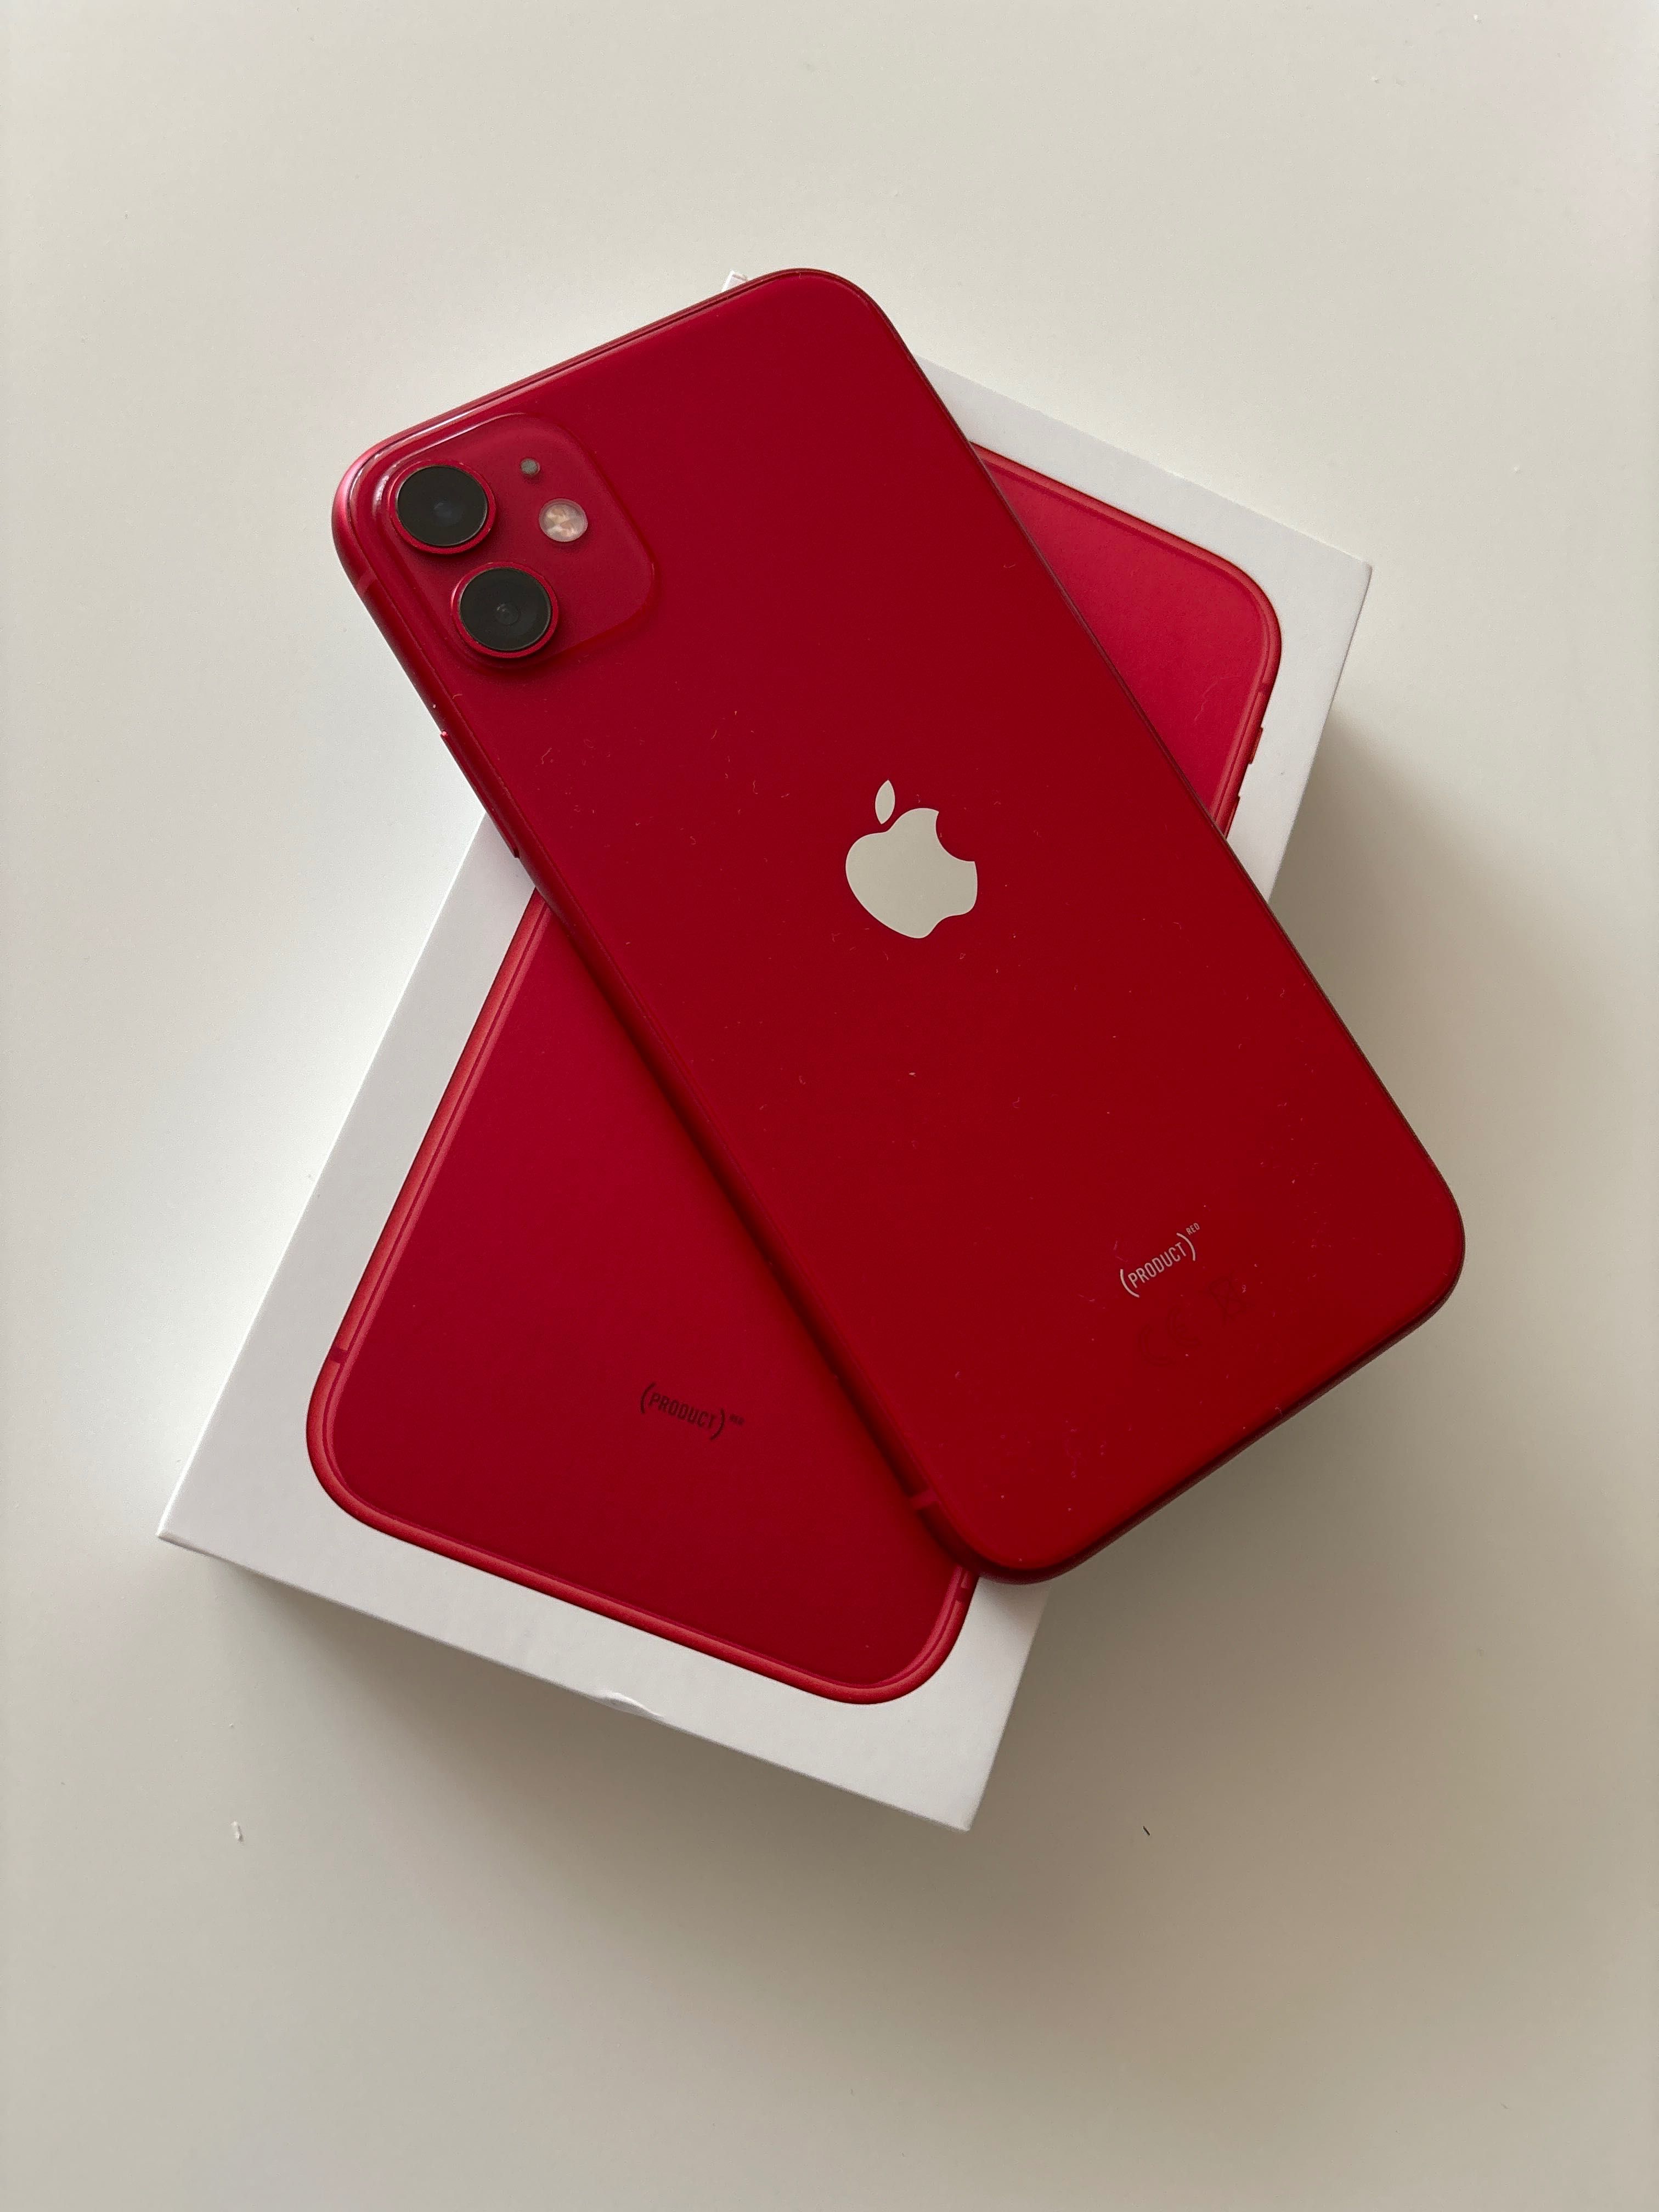 iPhone 11 red, 64gb